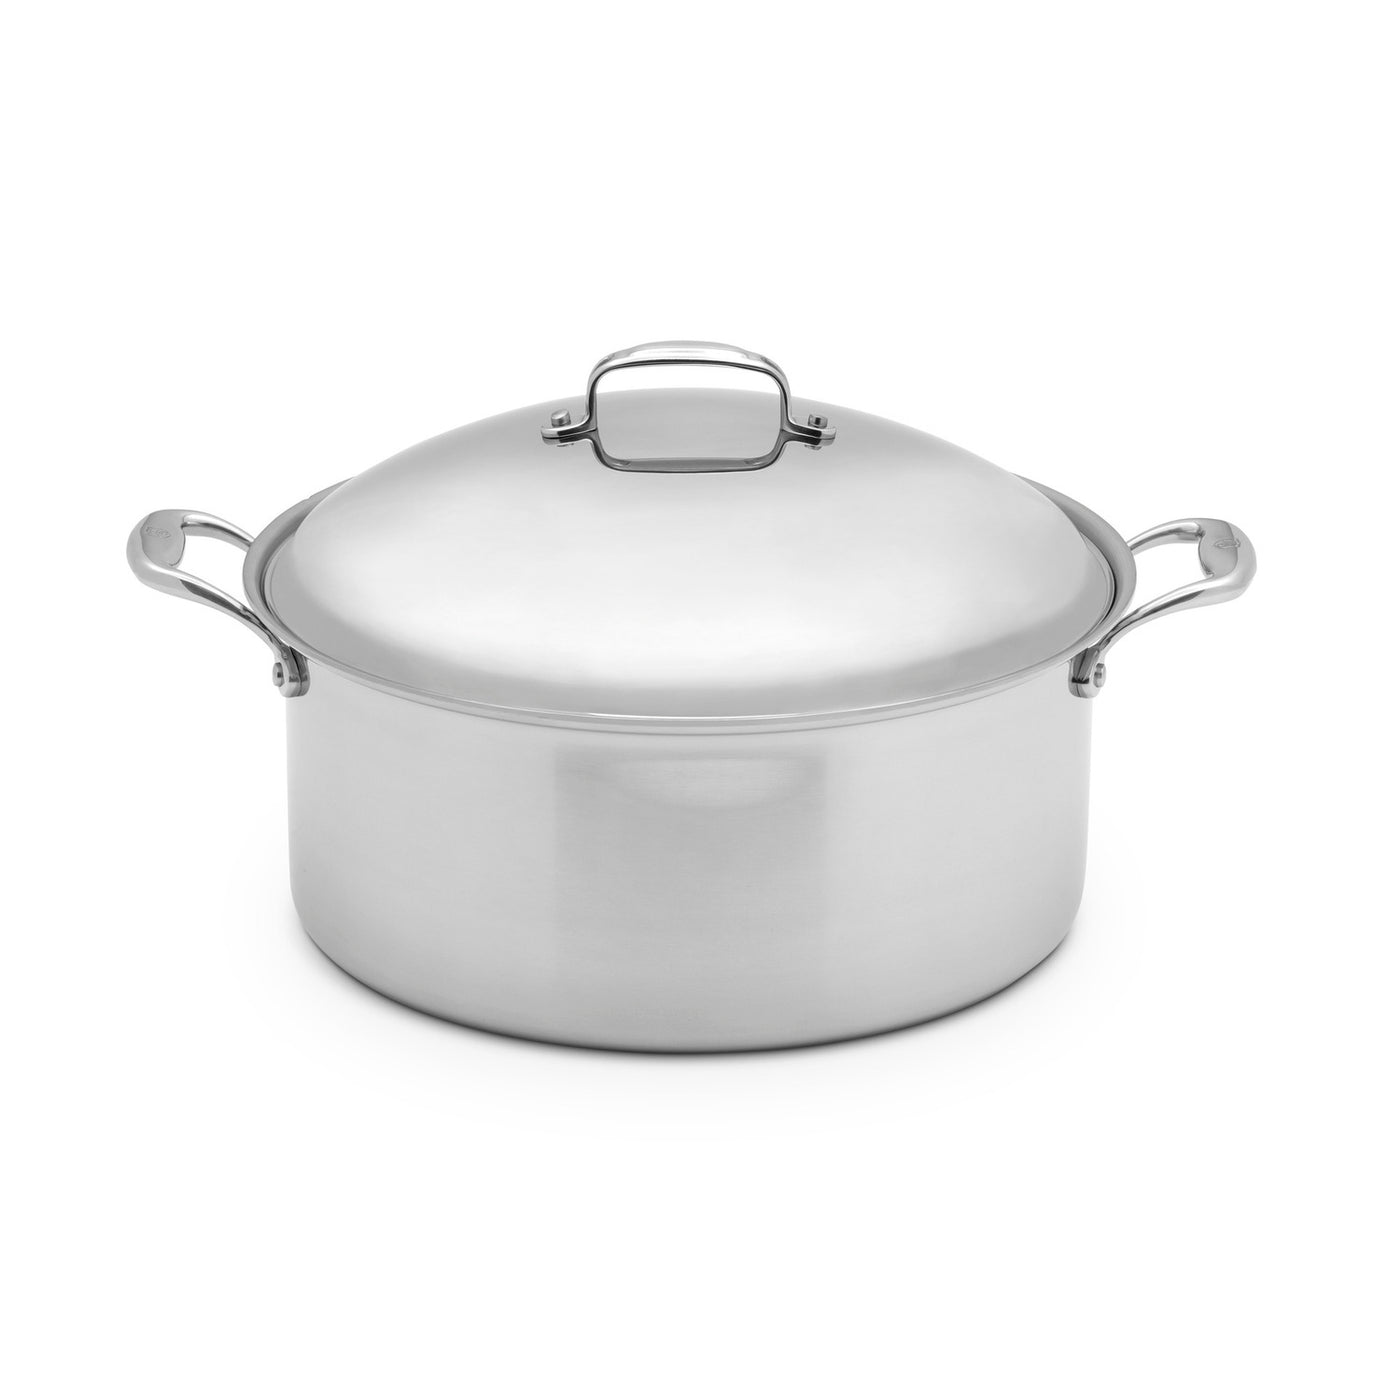 Discontinued 12 Quart Stockpot with Steamer Insert and Cover